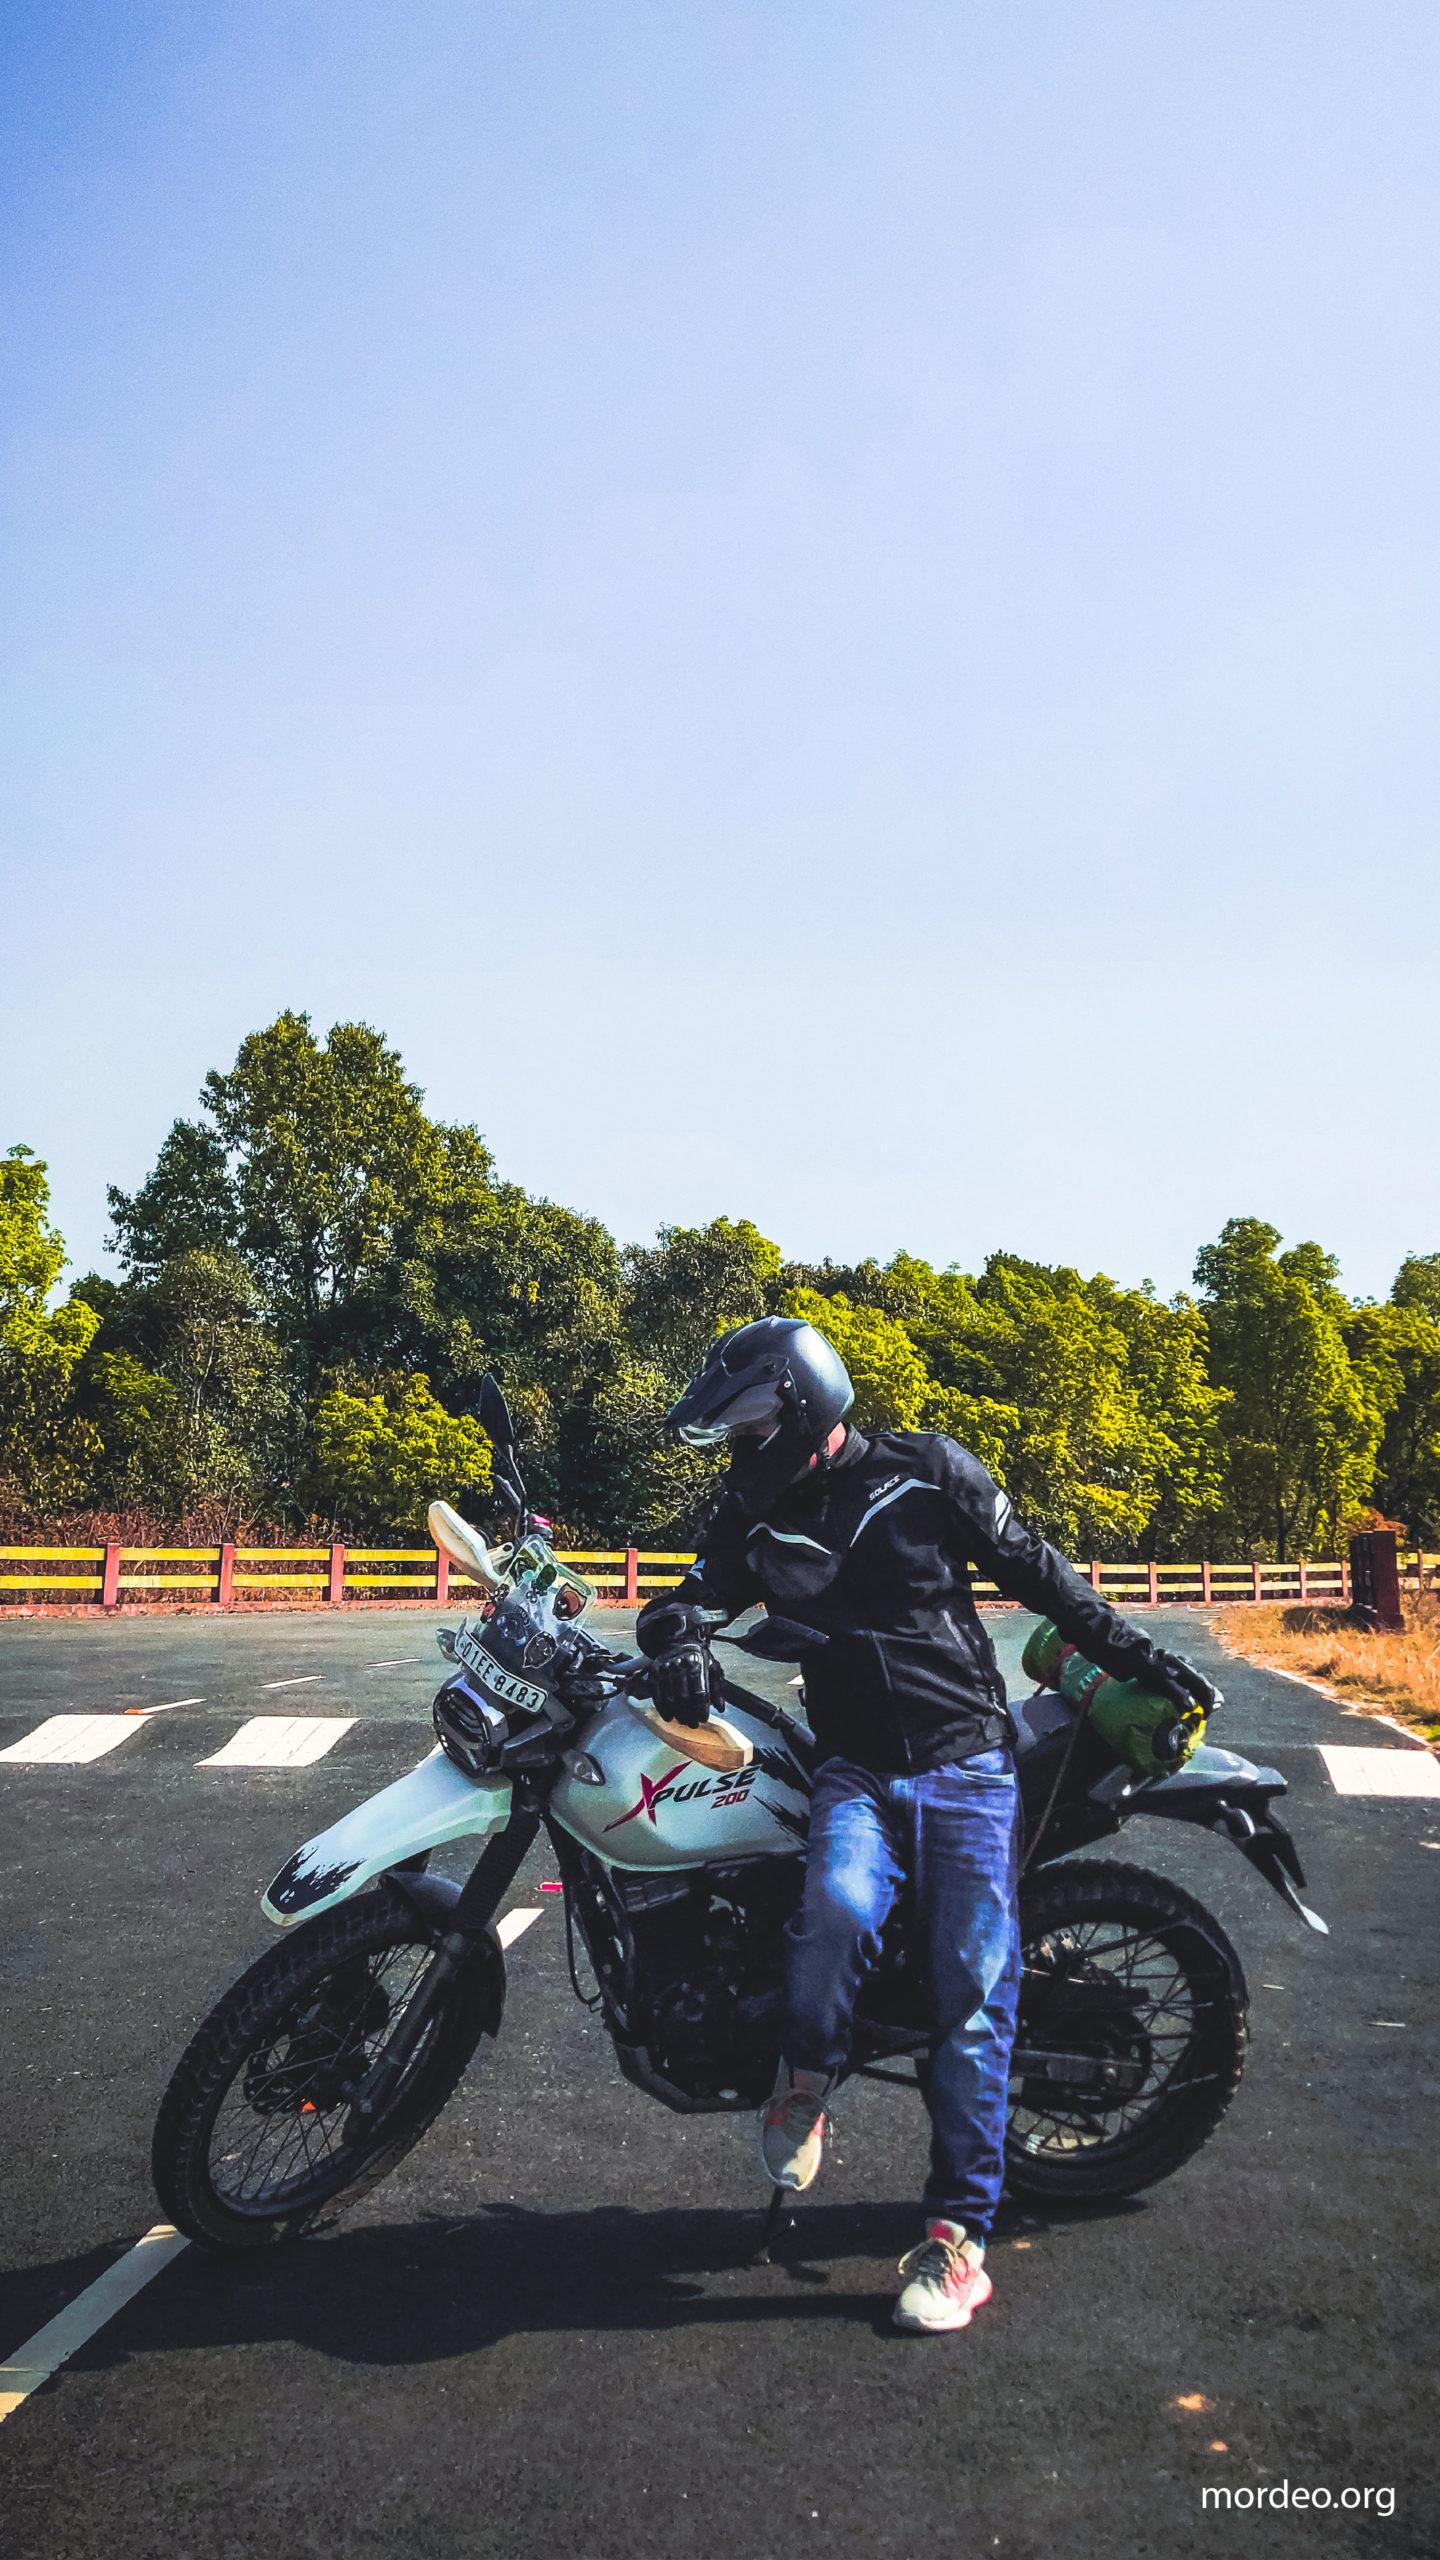 Hero XPulse 200 review: Off-roading gets affordable - Times of India